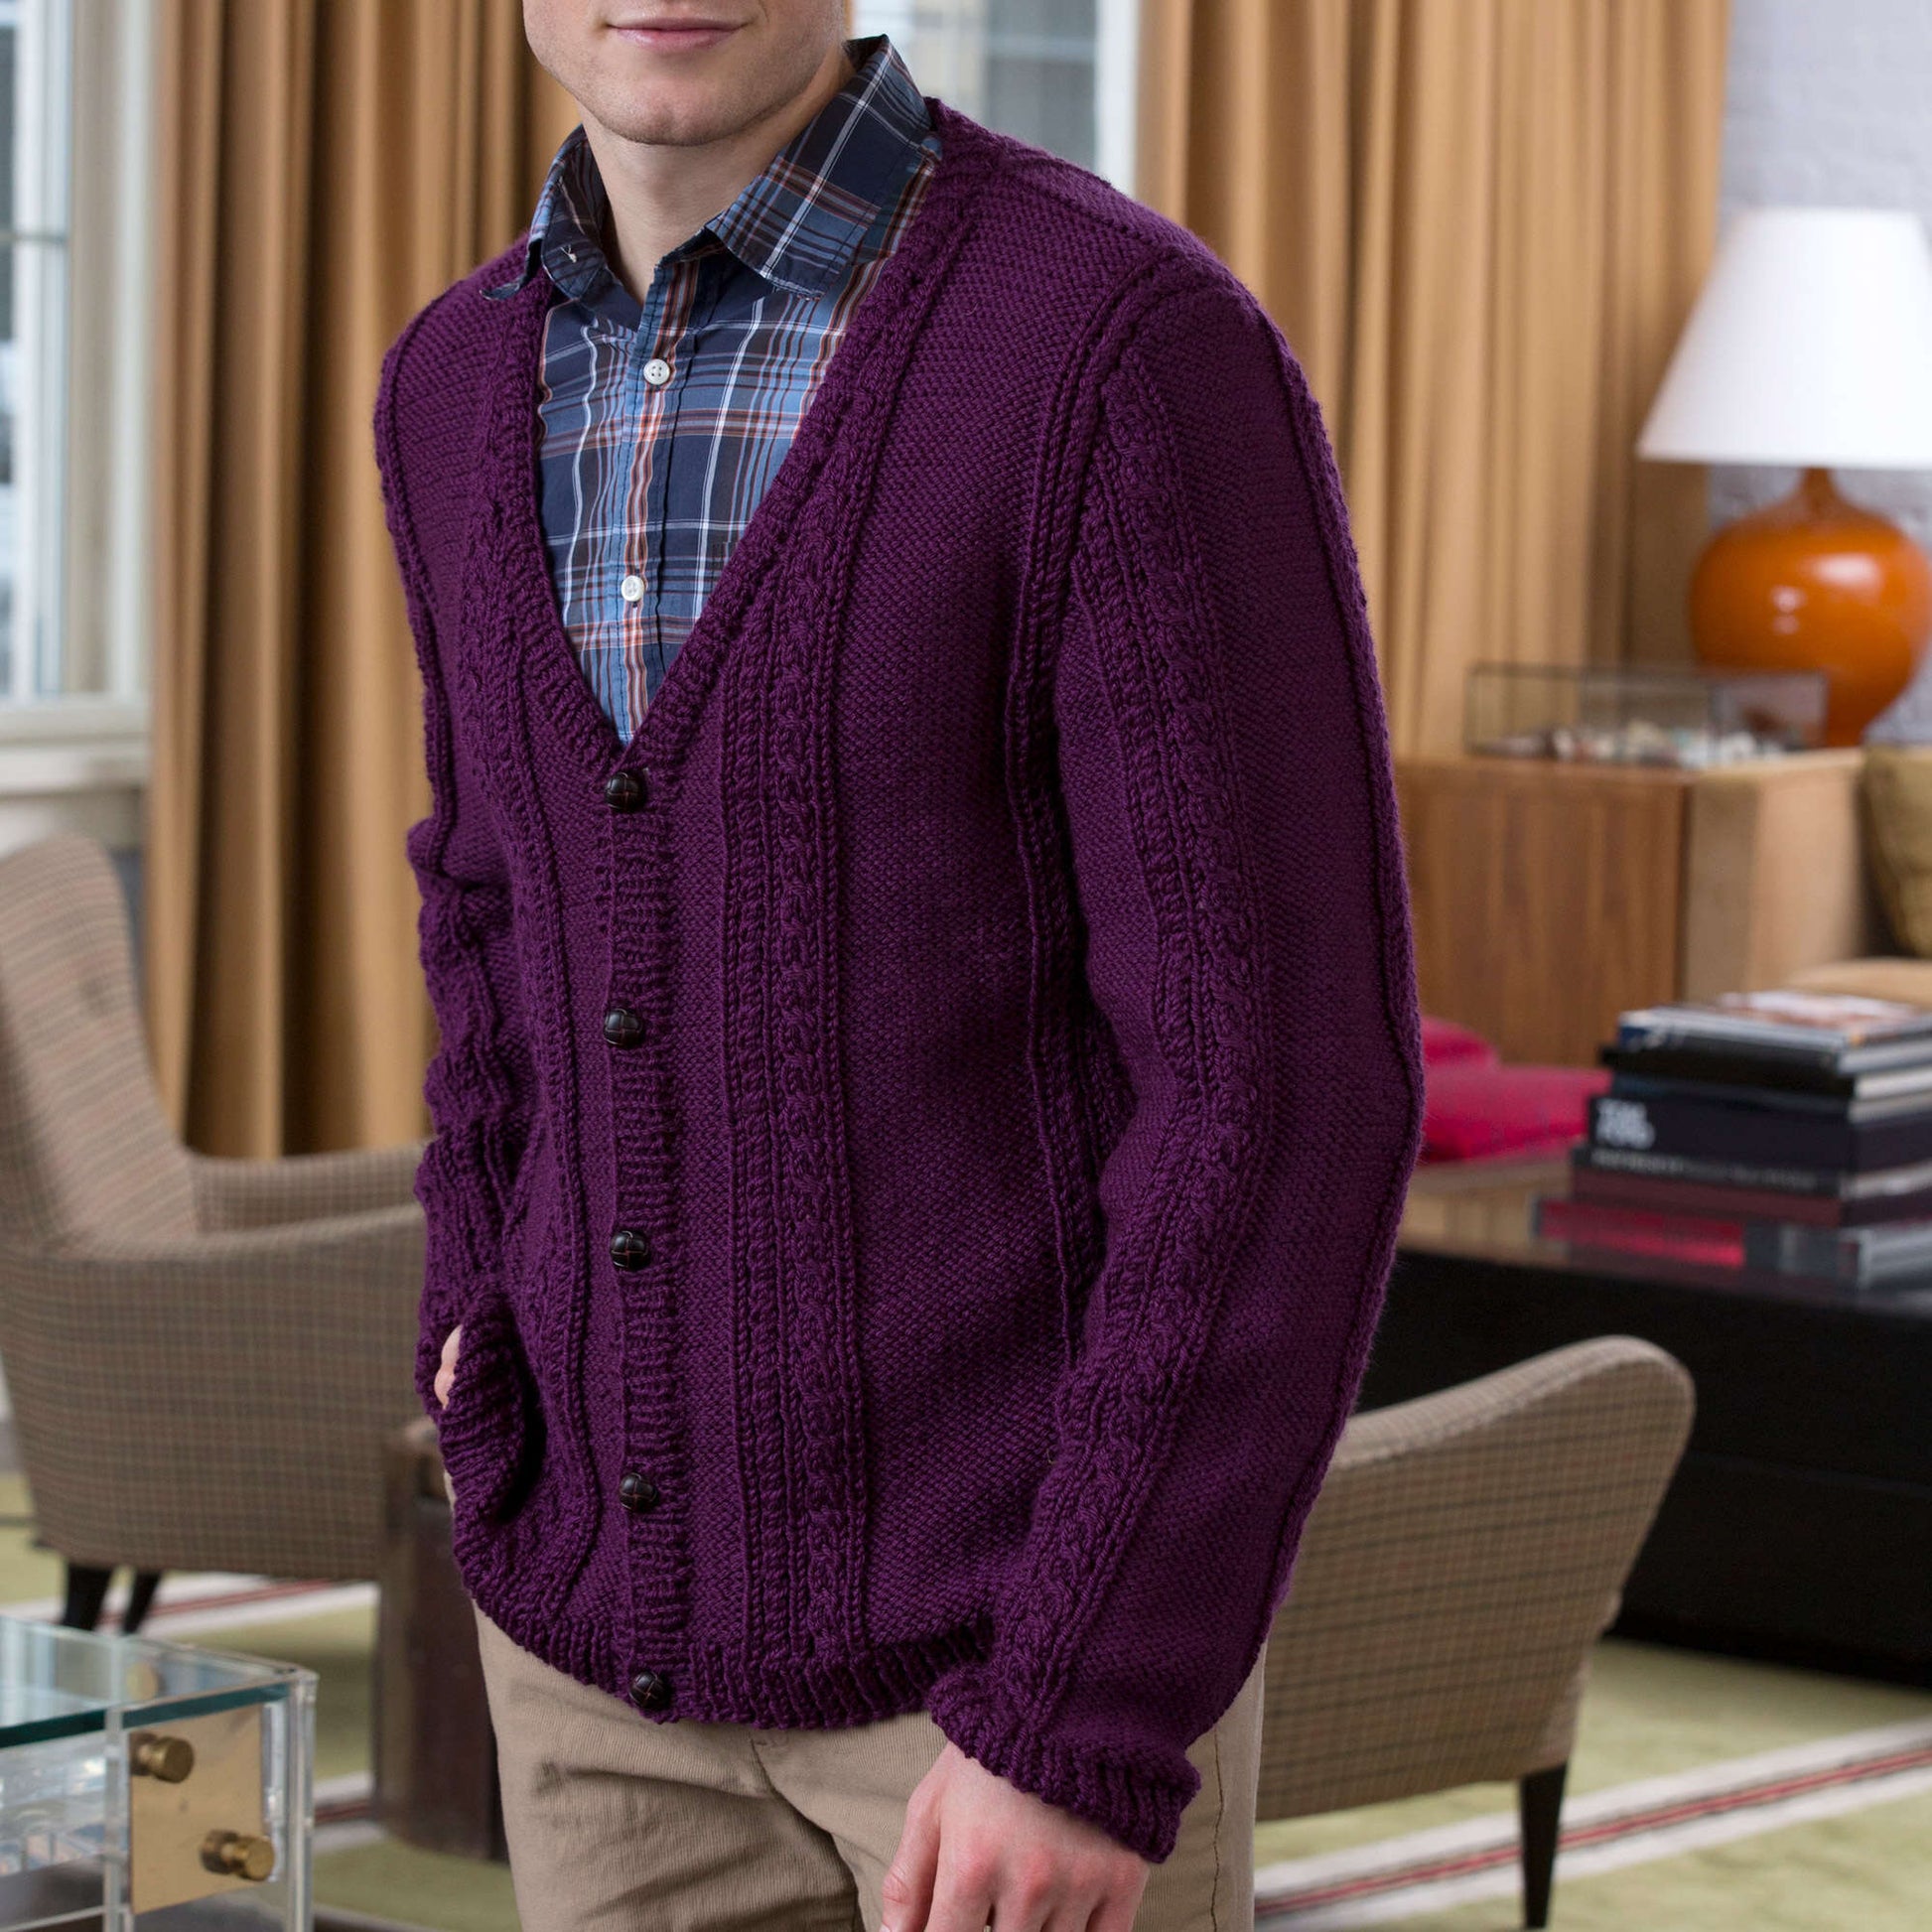 Free Red Heart Men's V-Neck Cable Knit Cardigan Pattern